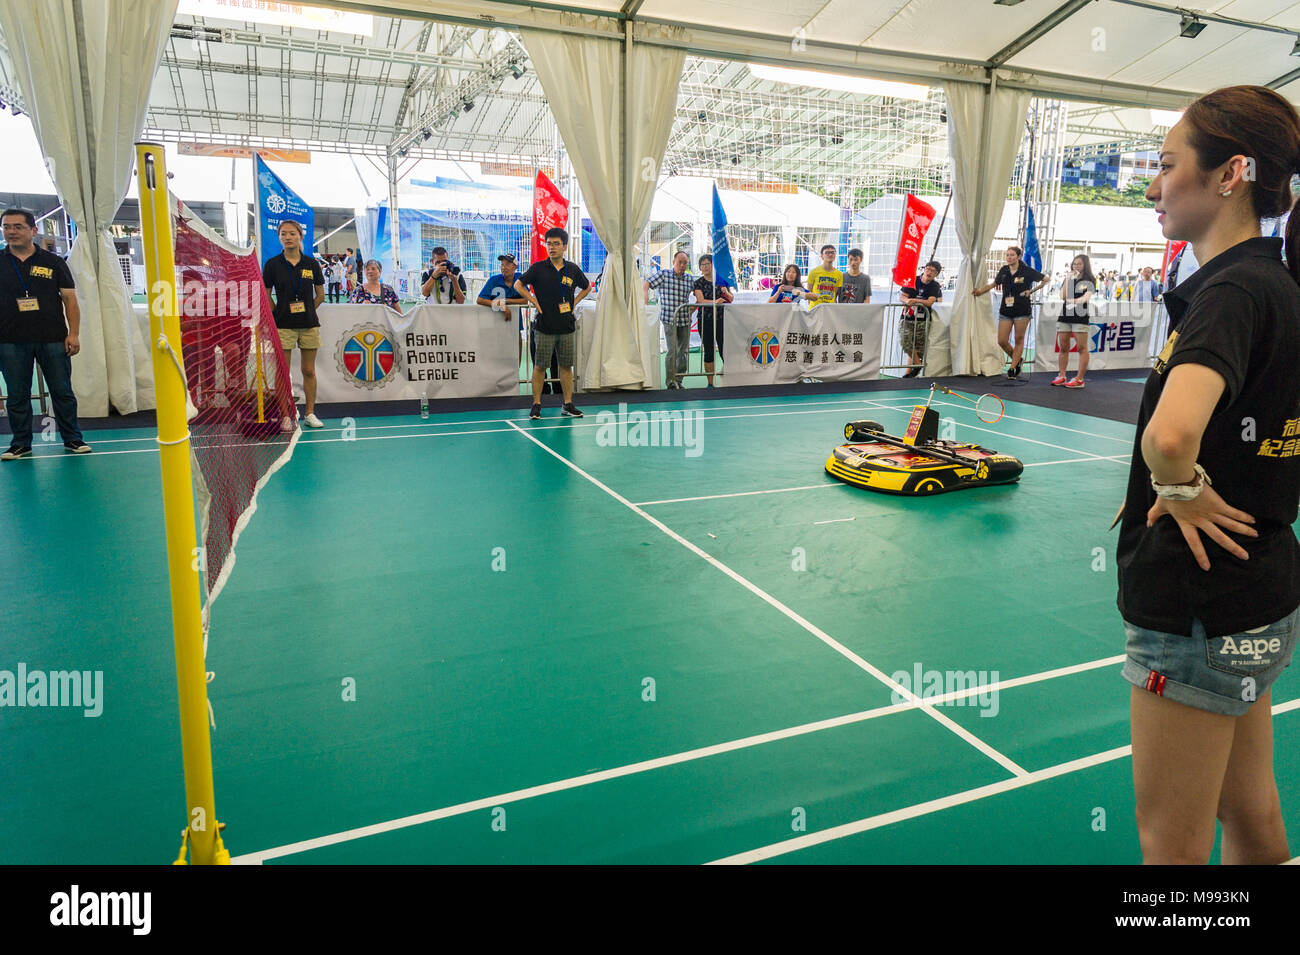 Robotic badminton player (machine) playing a game against human challengers as officials watch at a tech event in Hong Kong Stock Photo